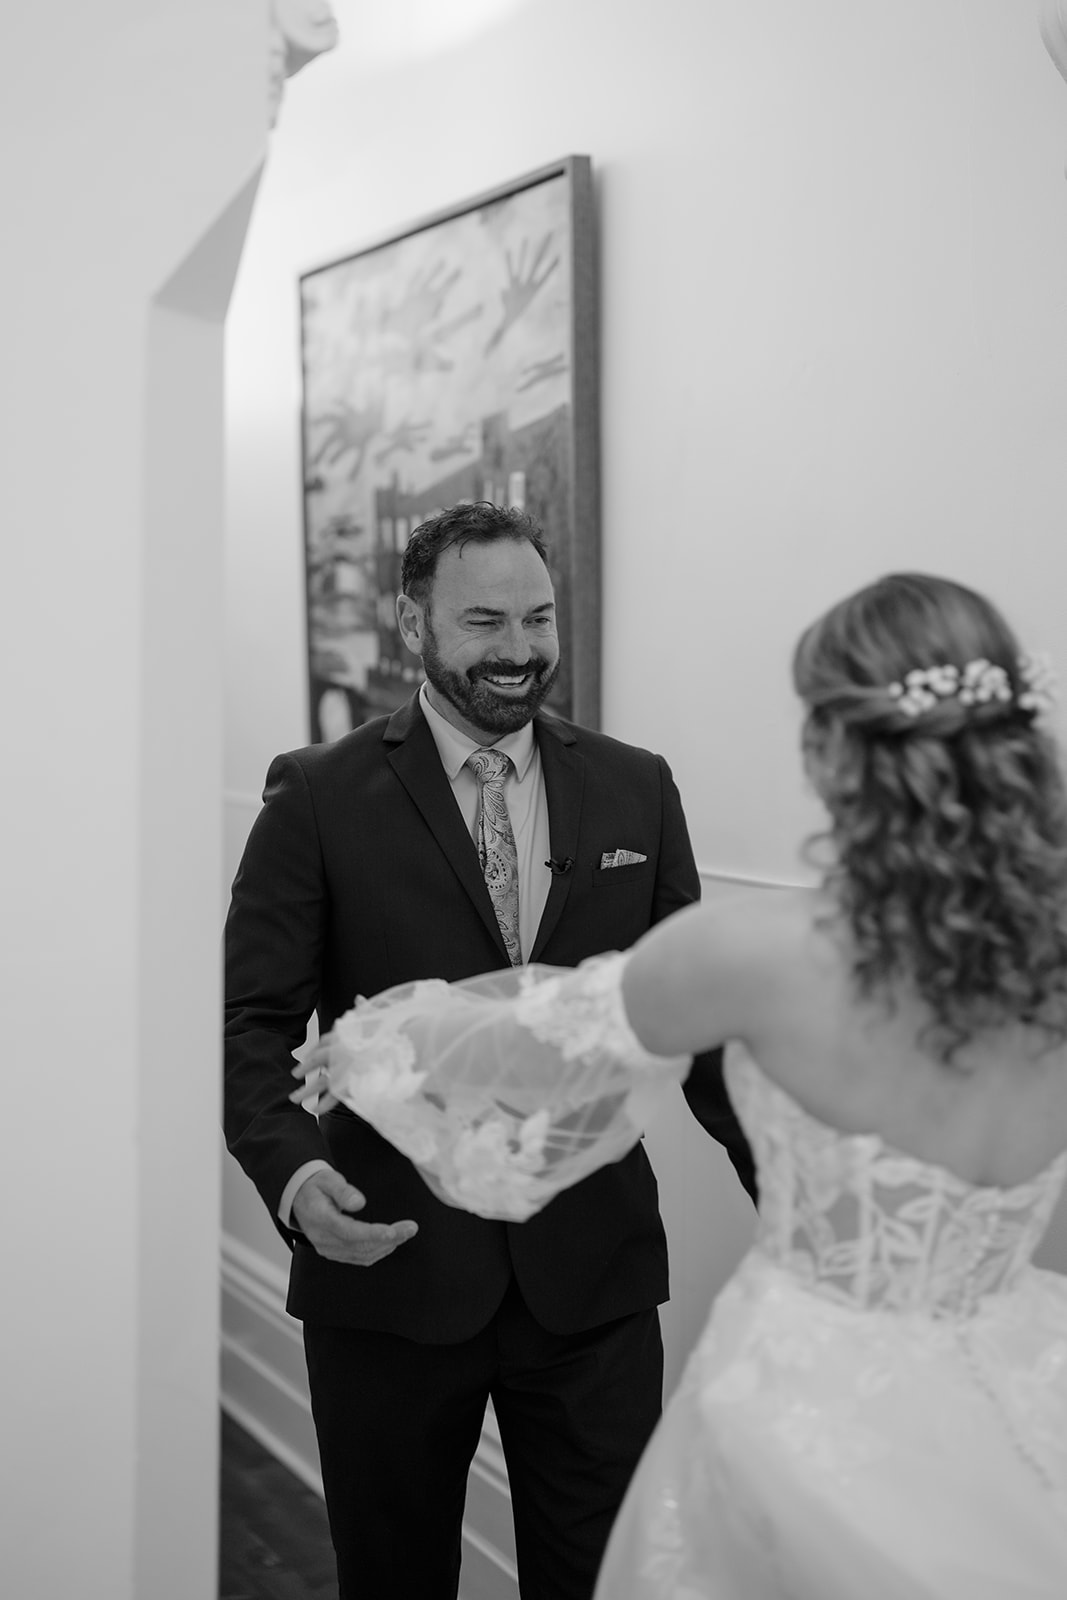 Bride in elegant wedding gown shares emotional moment with father before Montsalvat ceremony.